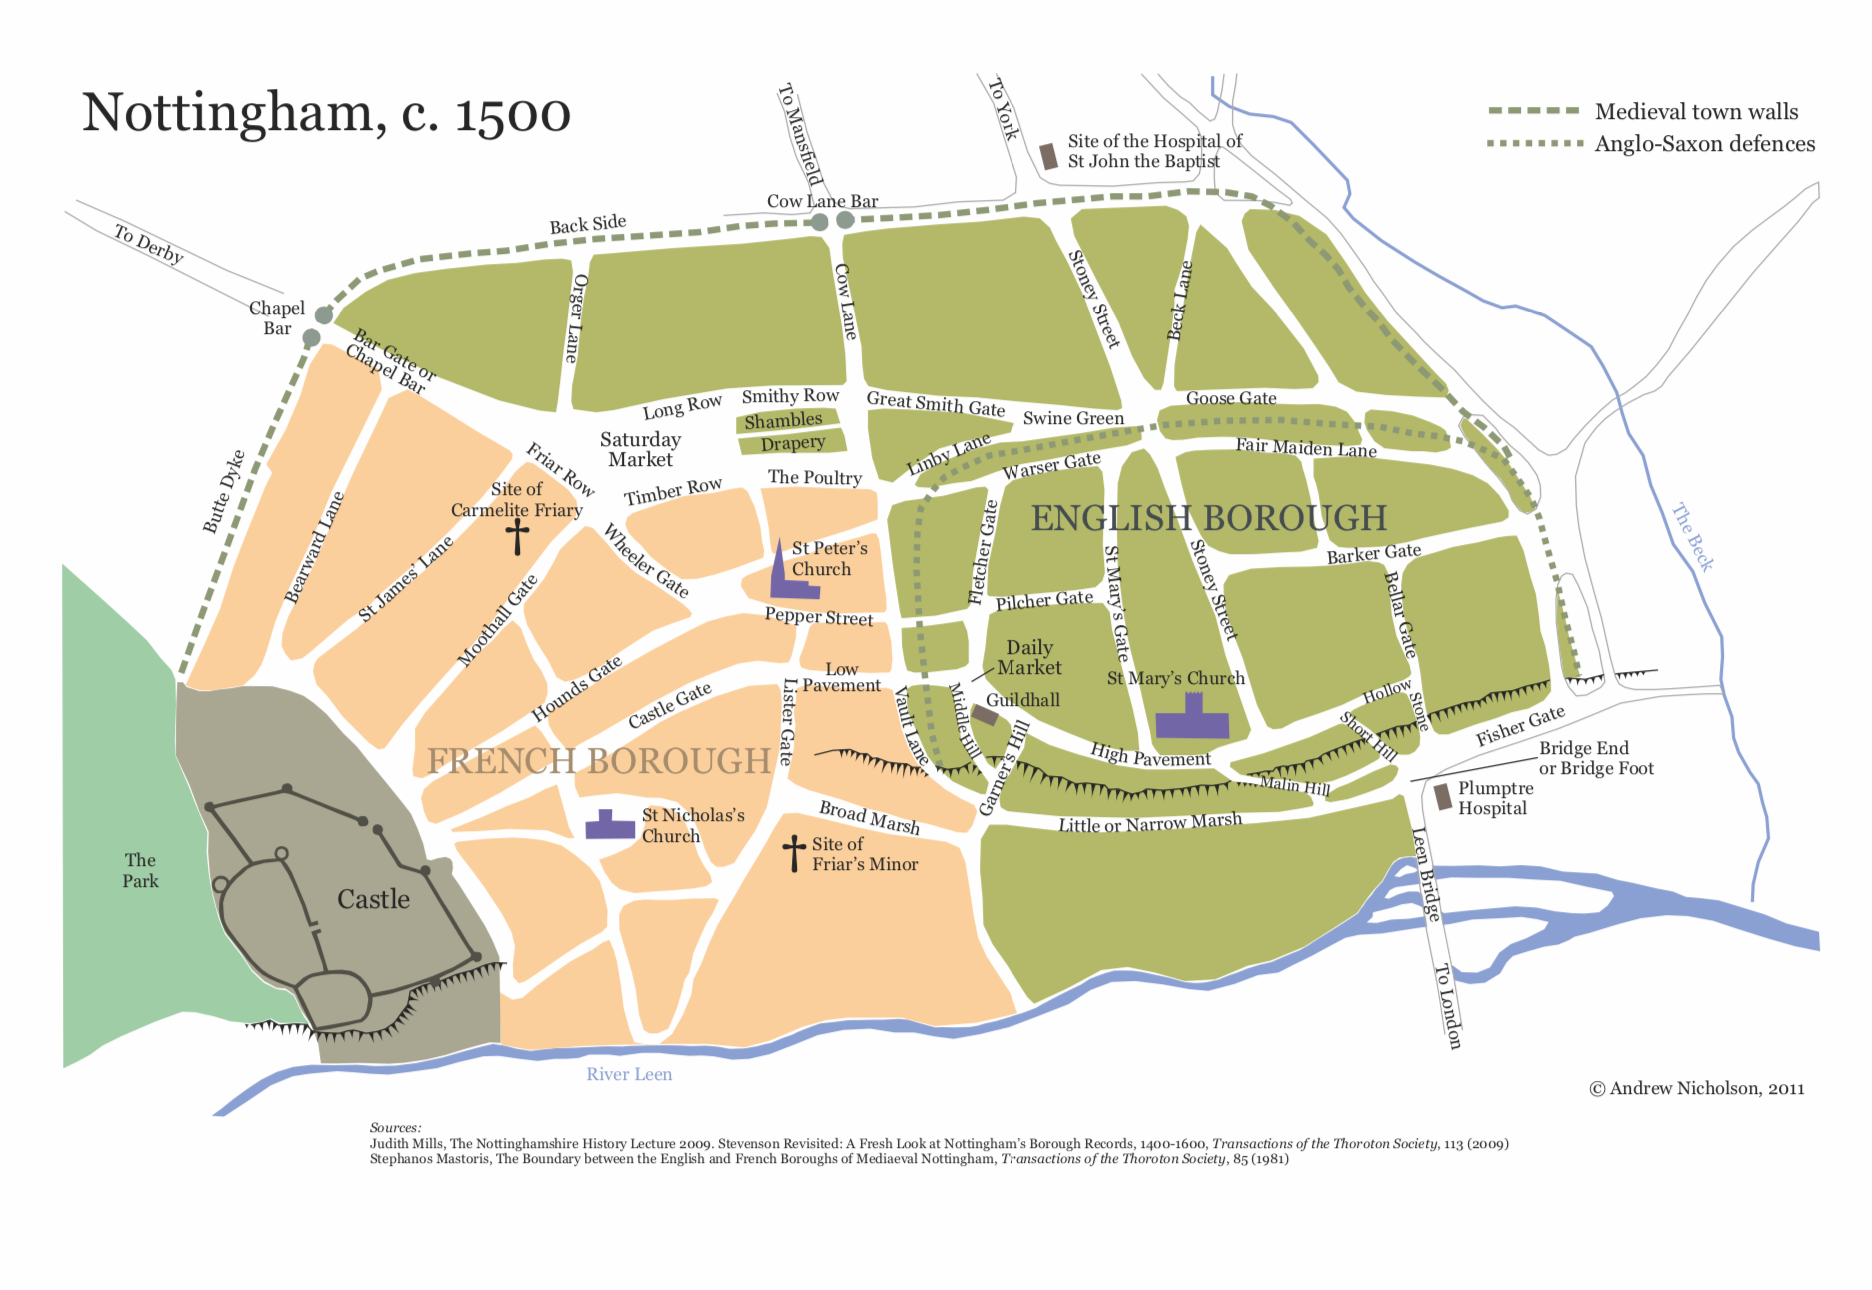 Plan of Nottingham town and castle circa 1500